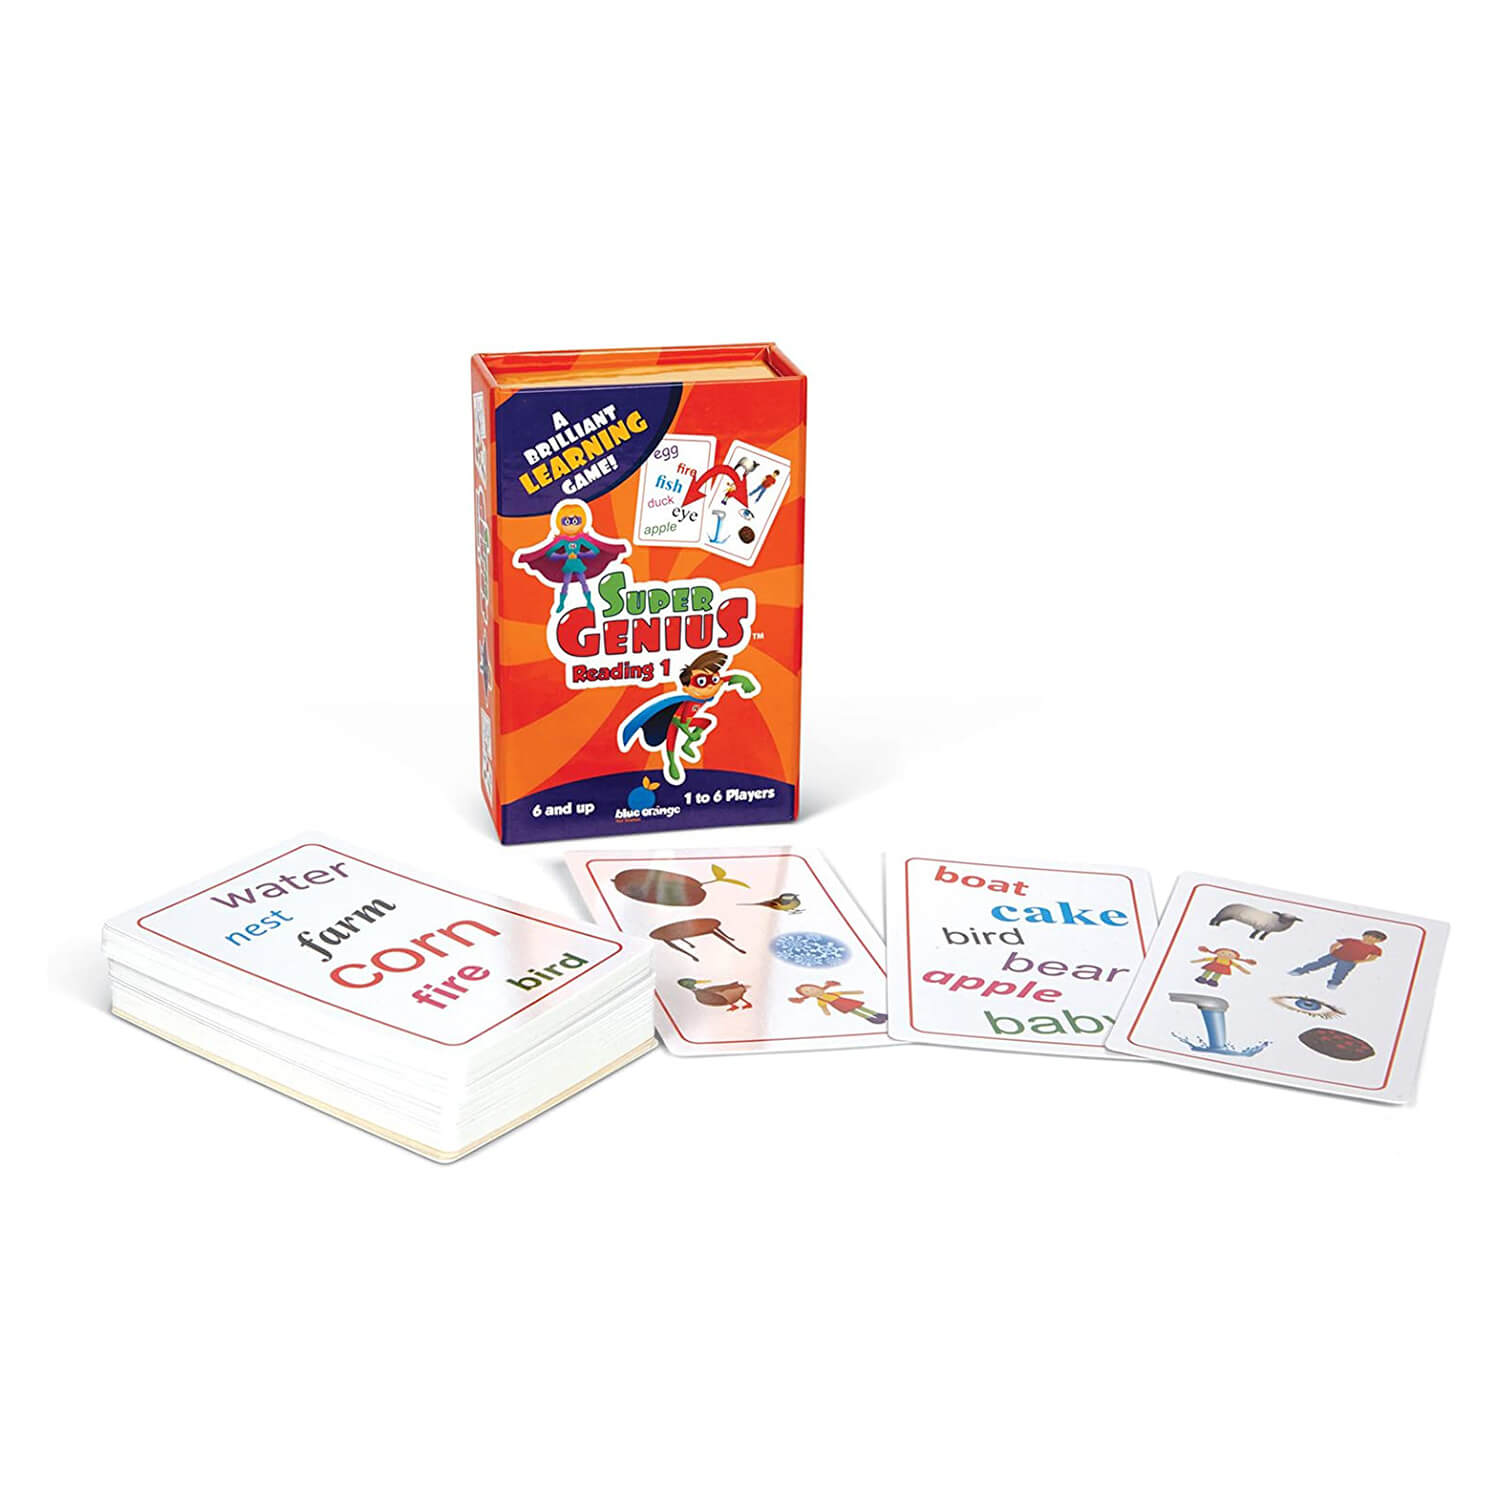 Frontal view of cards included in the Blue Orange Super Genius Reading 1 Game.